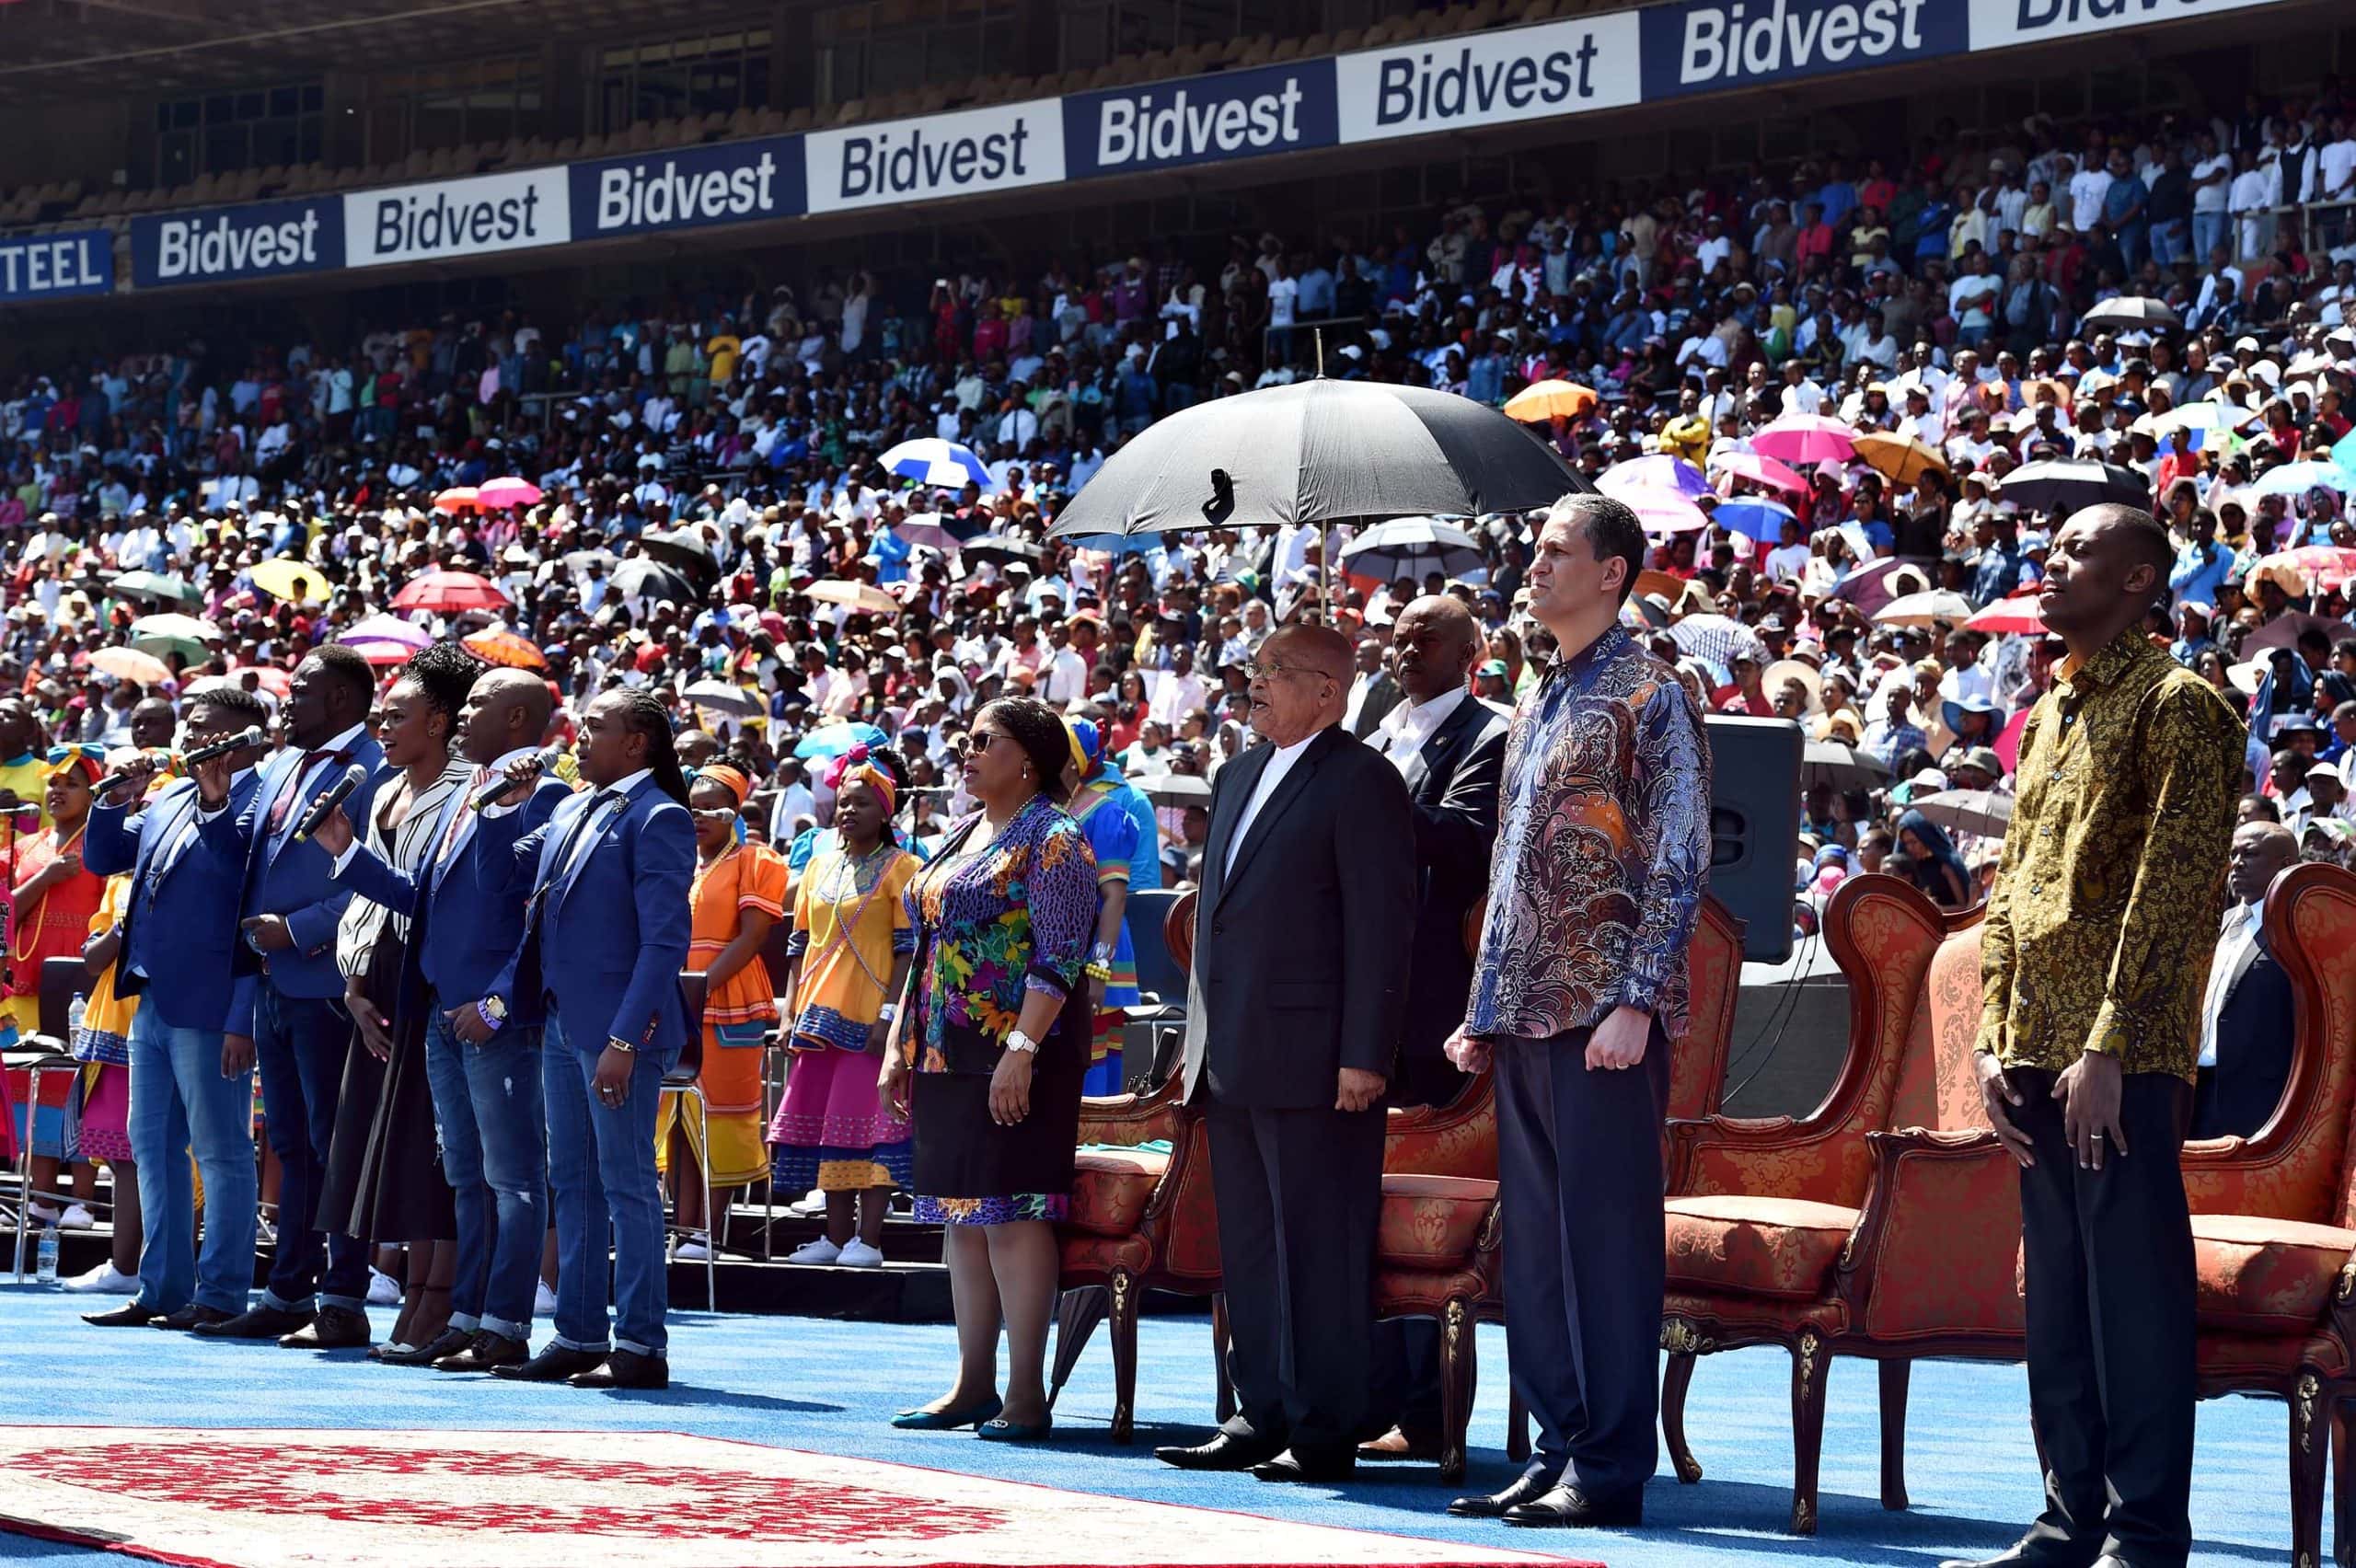 resident Zuma flanked by Minister Nomvula Mokonyane and Bishop Marcerlo during the singing of the National Anthem at the Good Friday Church Service).